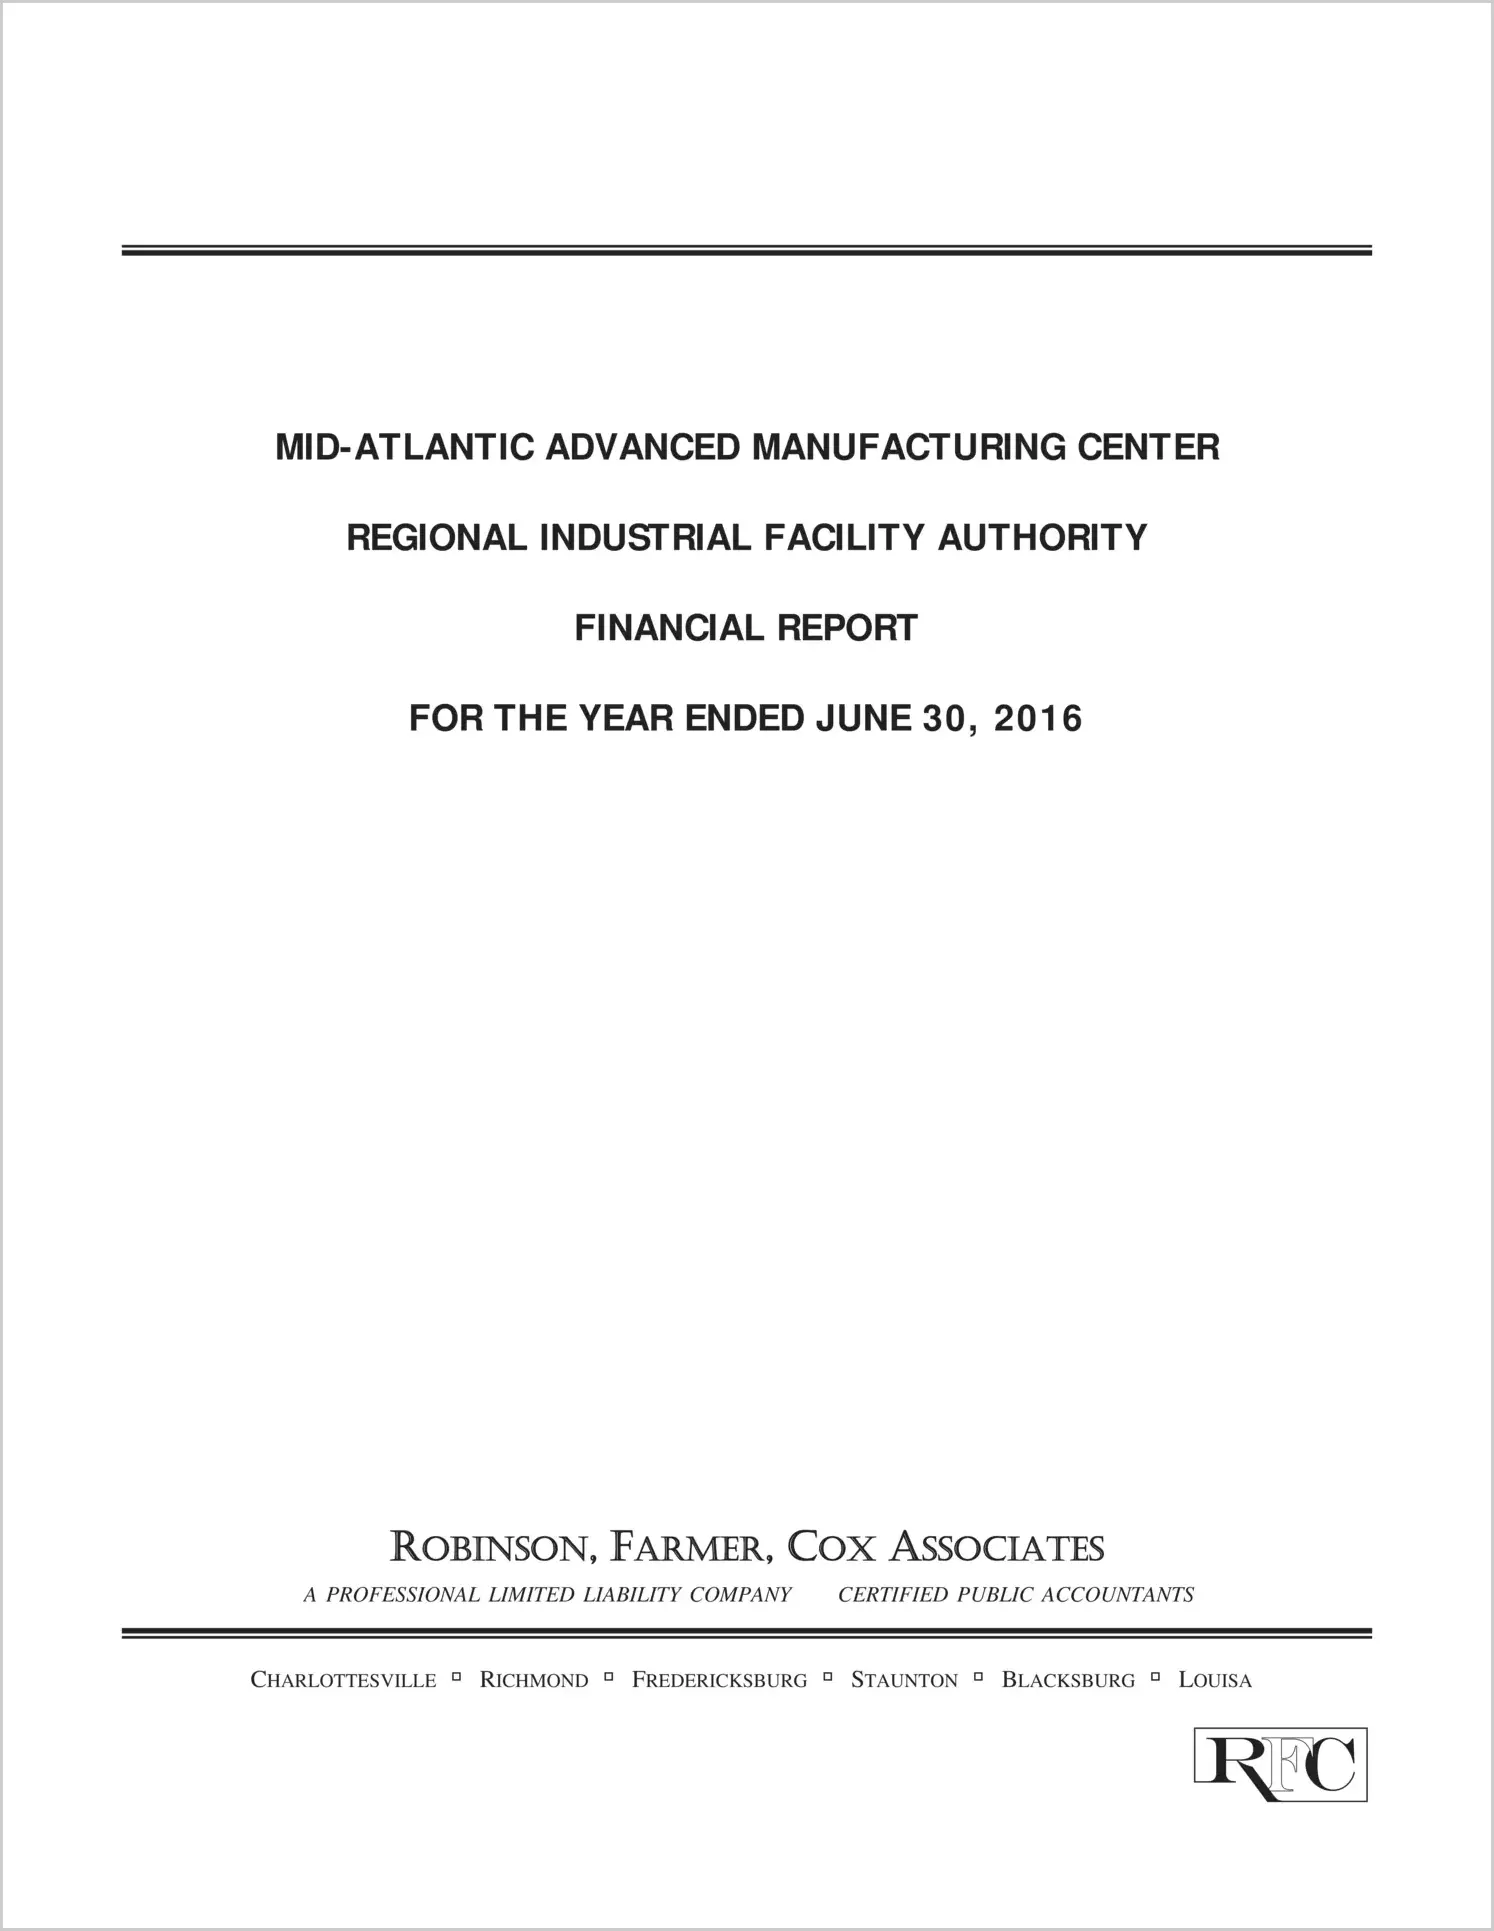 2016 ABC/Other Annual Financial Report  for Mid-Atlantic Advanced Manufacturing Center Regional Industrial Facility Authority